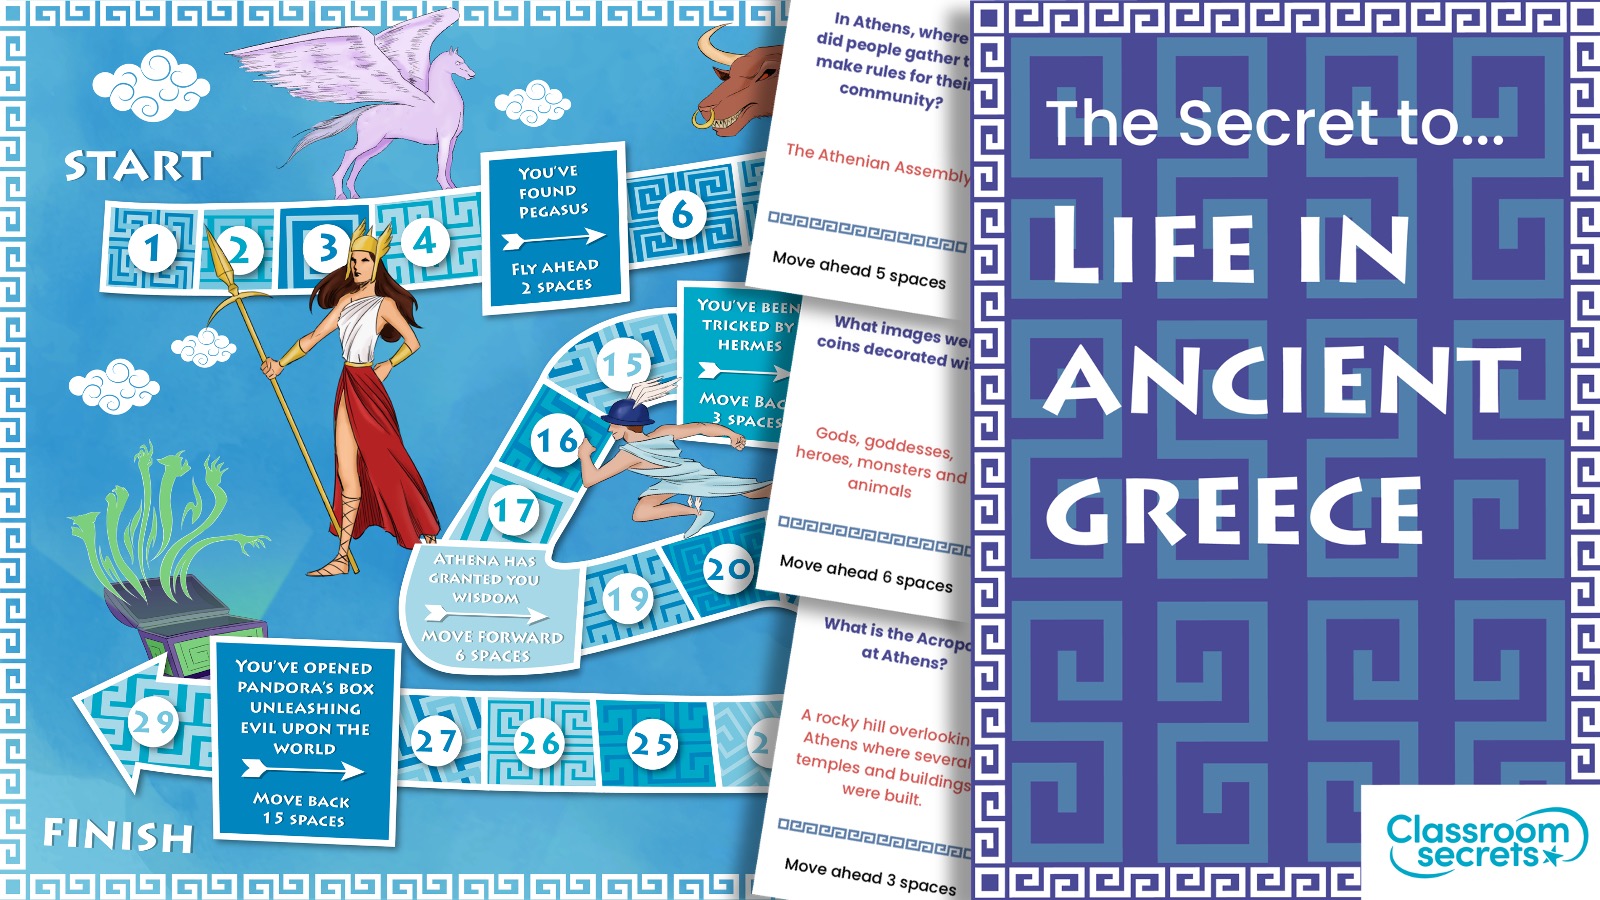 The Secret to Life in Ancient Greece - Board Game